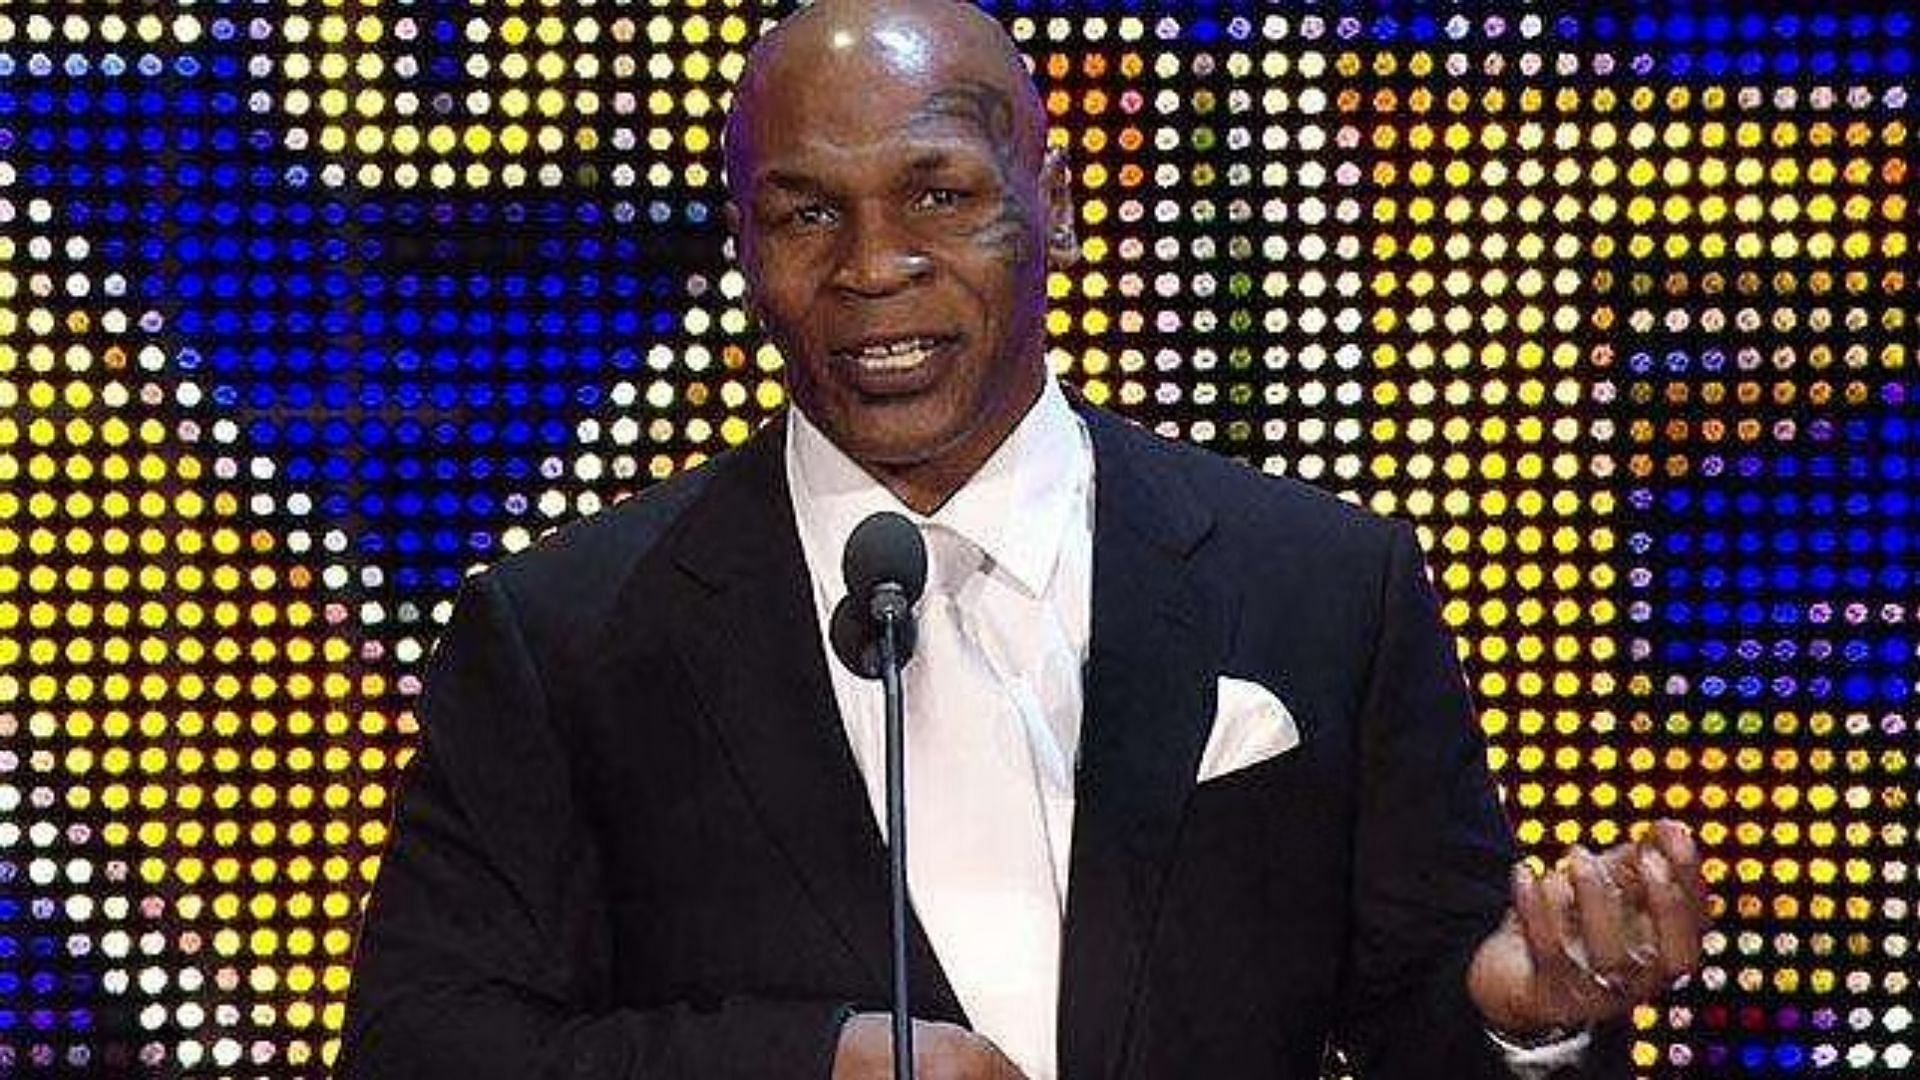 Mike Tyson has been inducted into both the Boxing and WWE Hall of Fame